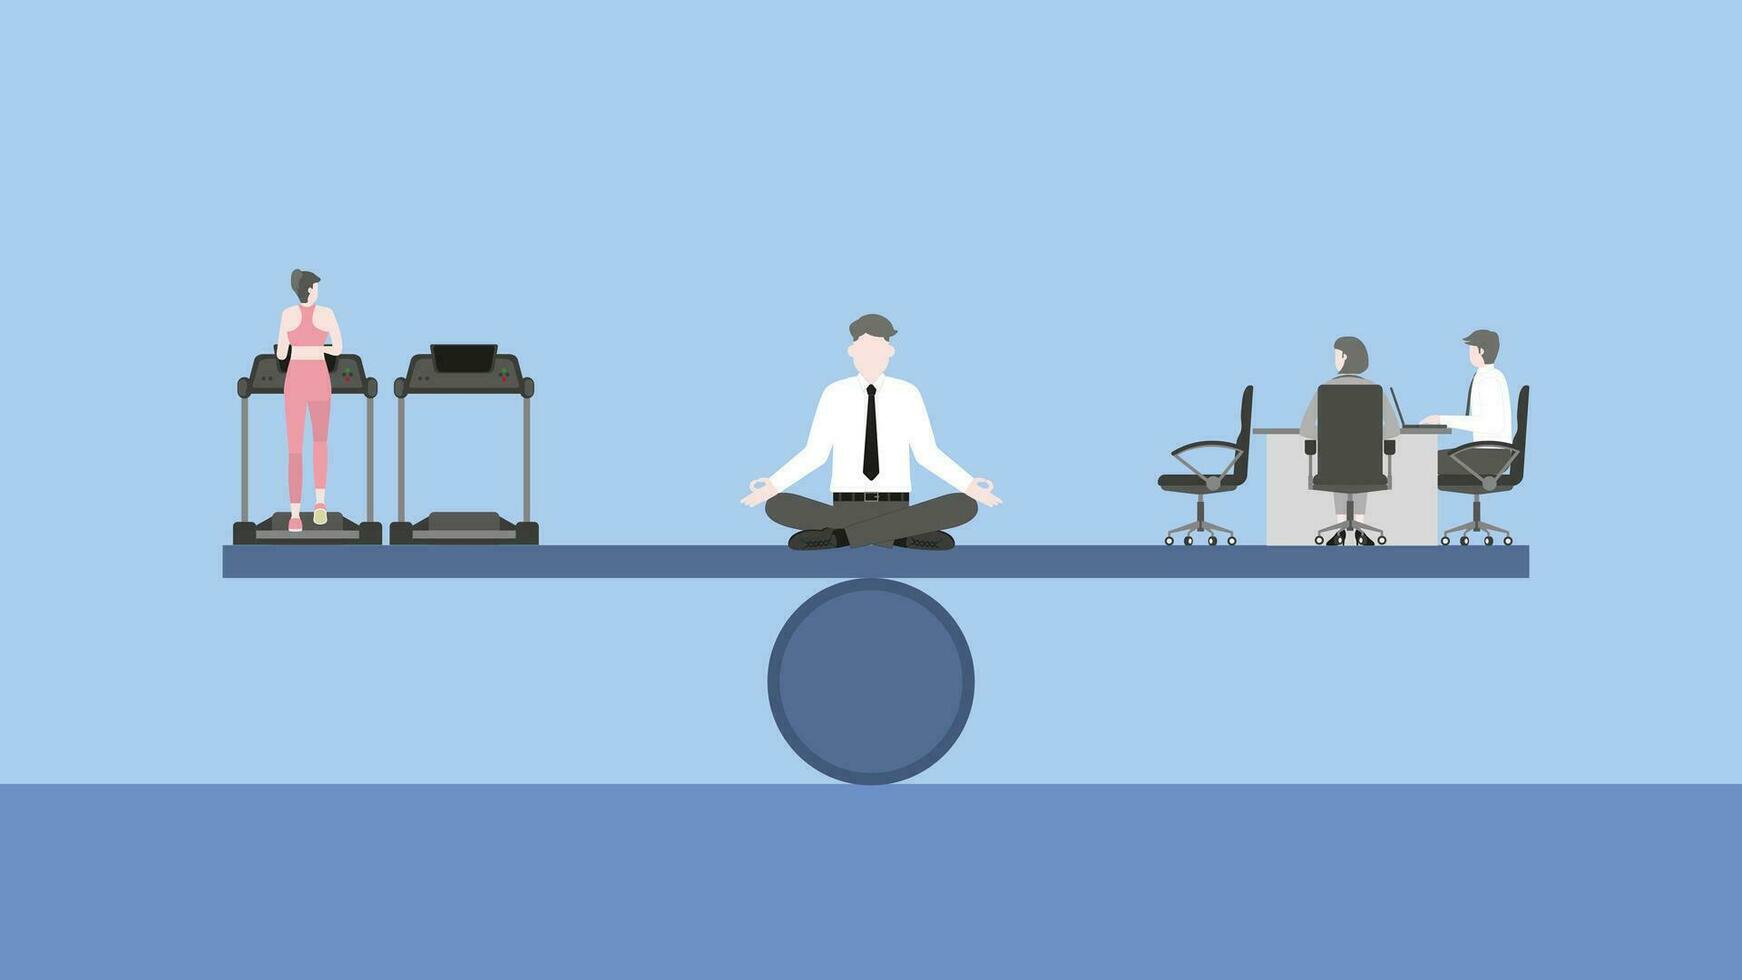 Meditation businessman sits and thinks at the center of a seesaw between exercise running on treadmill and office meeting vector